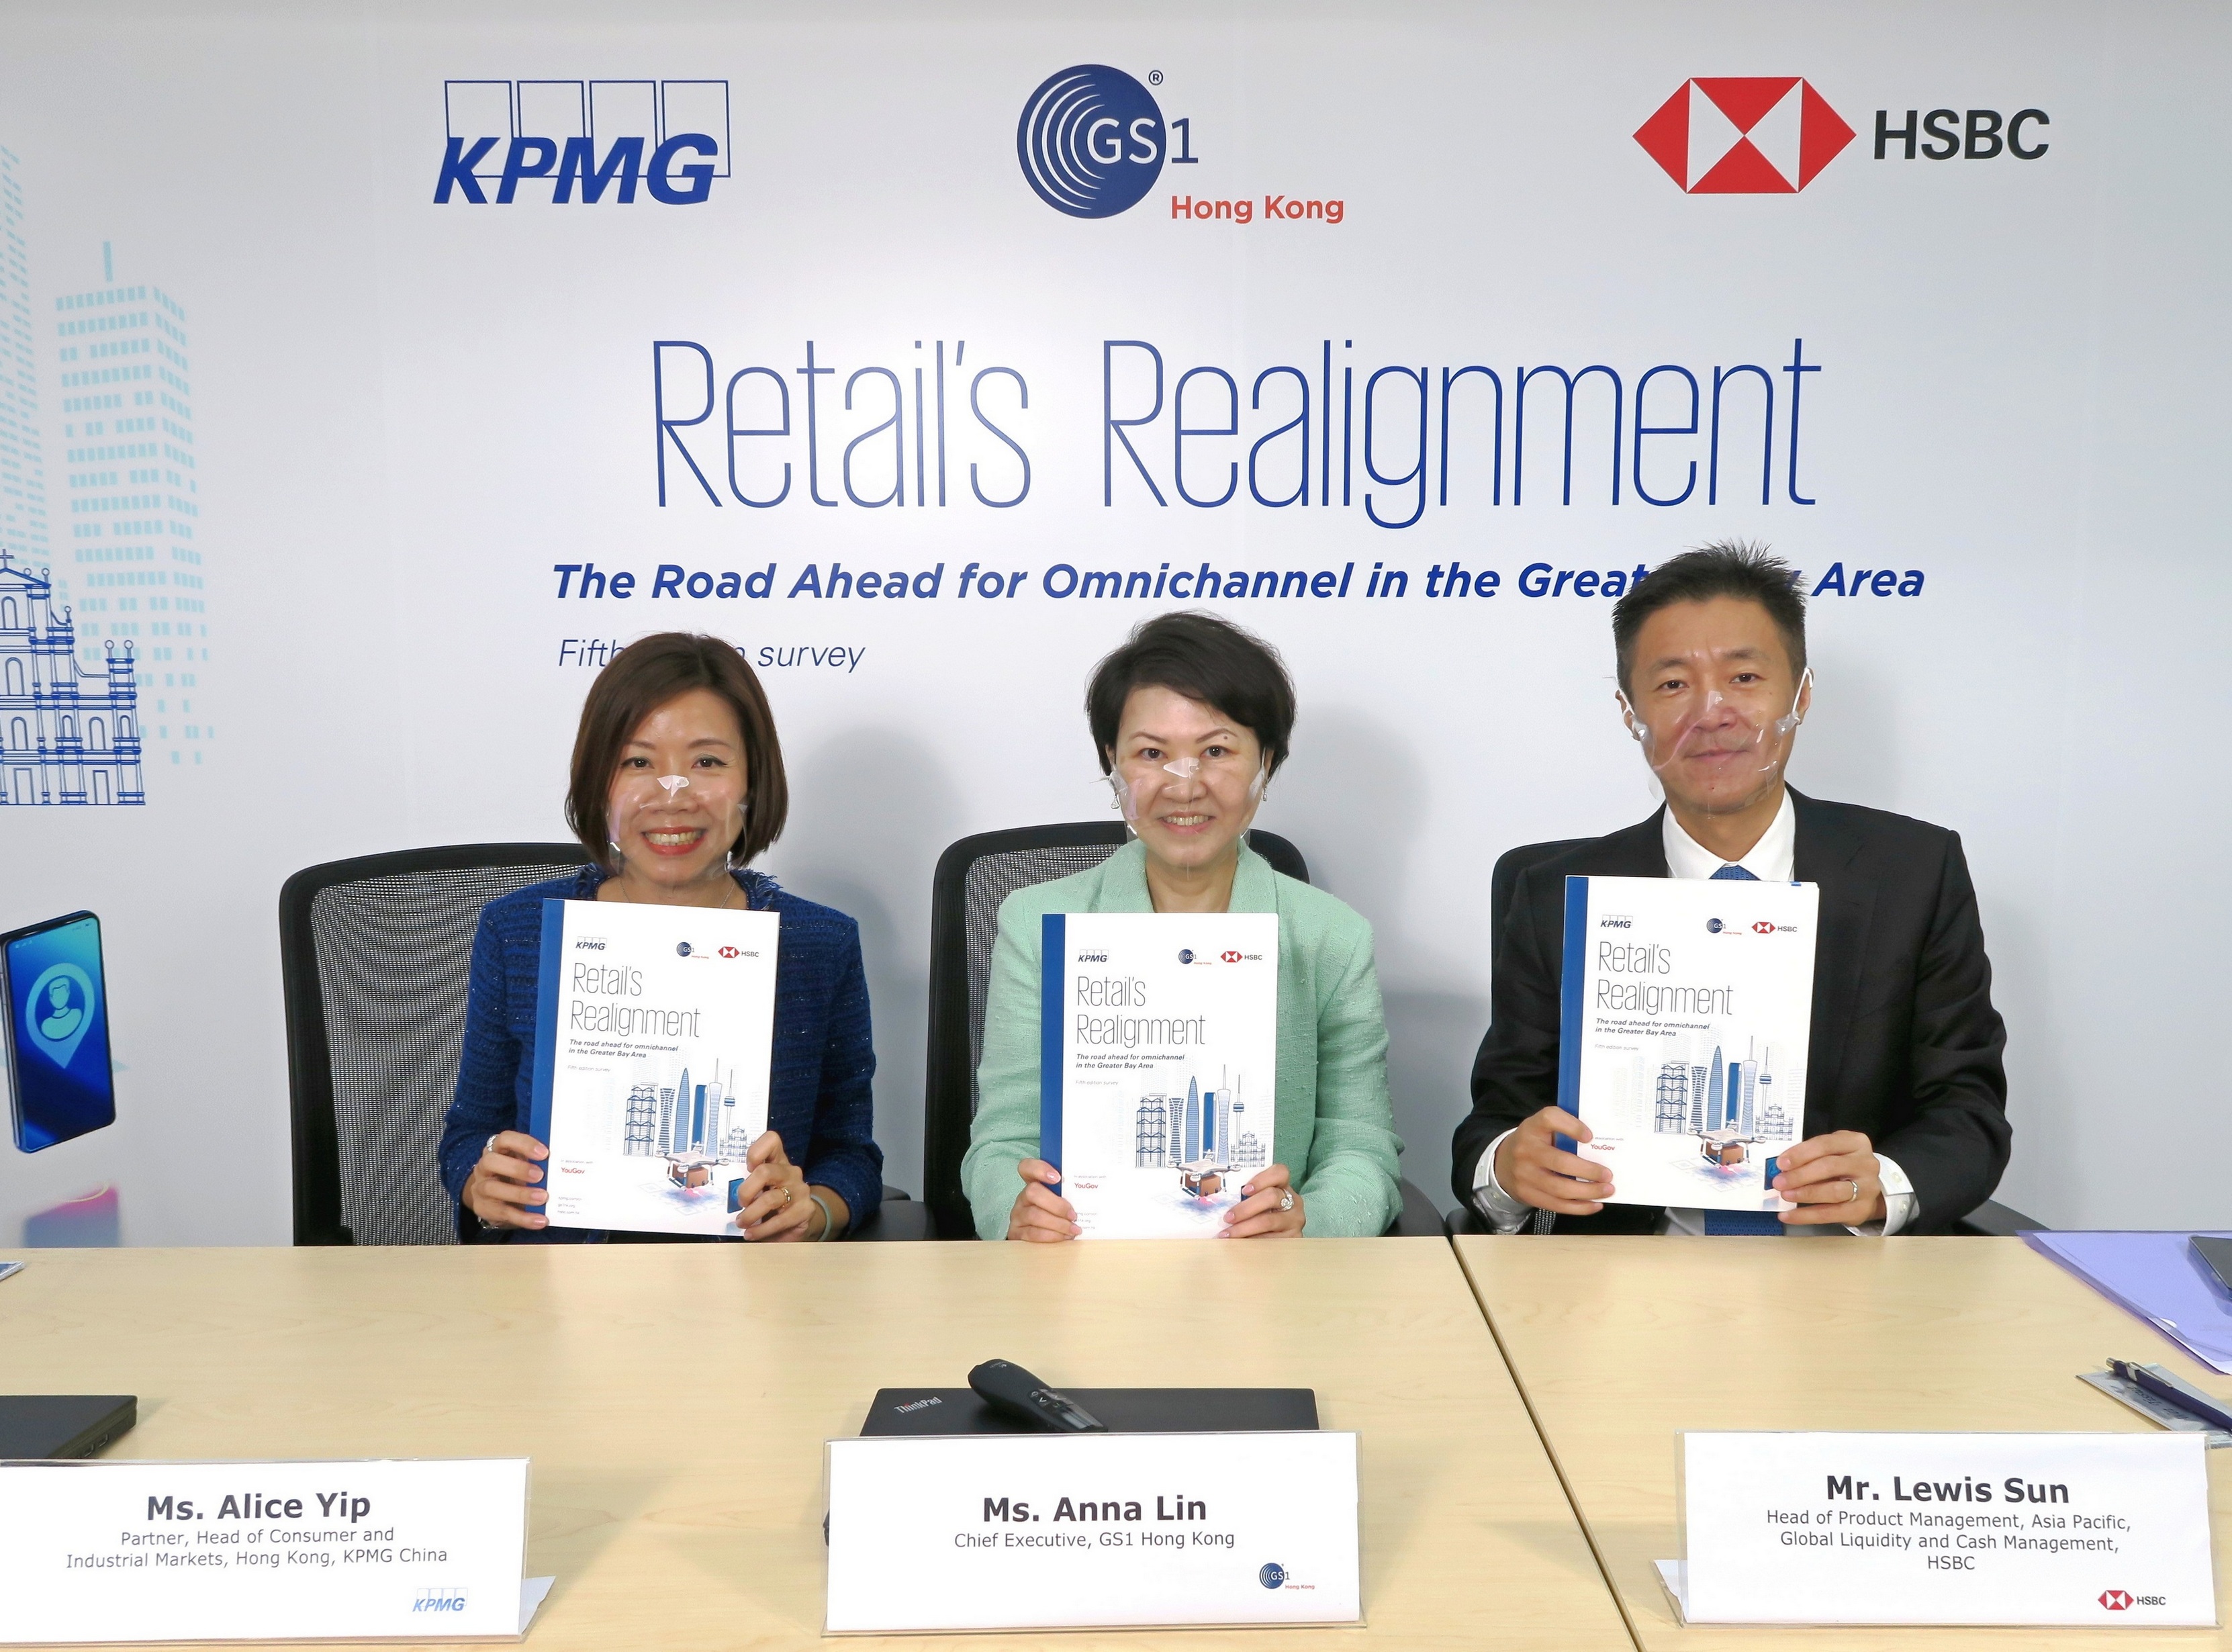  Greater Bay Area retailers increase focus on digital strategies, KPMG, GS1 and HSBC survey finds